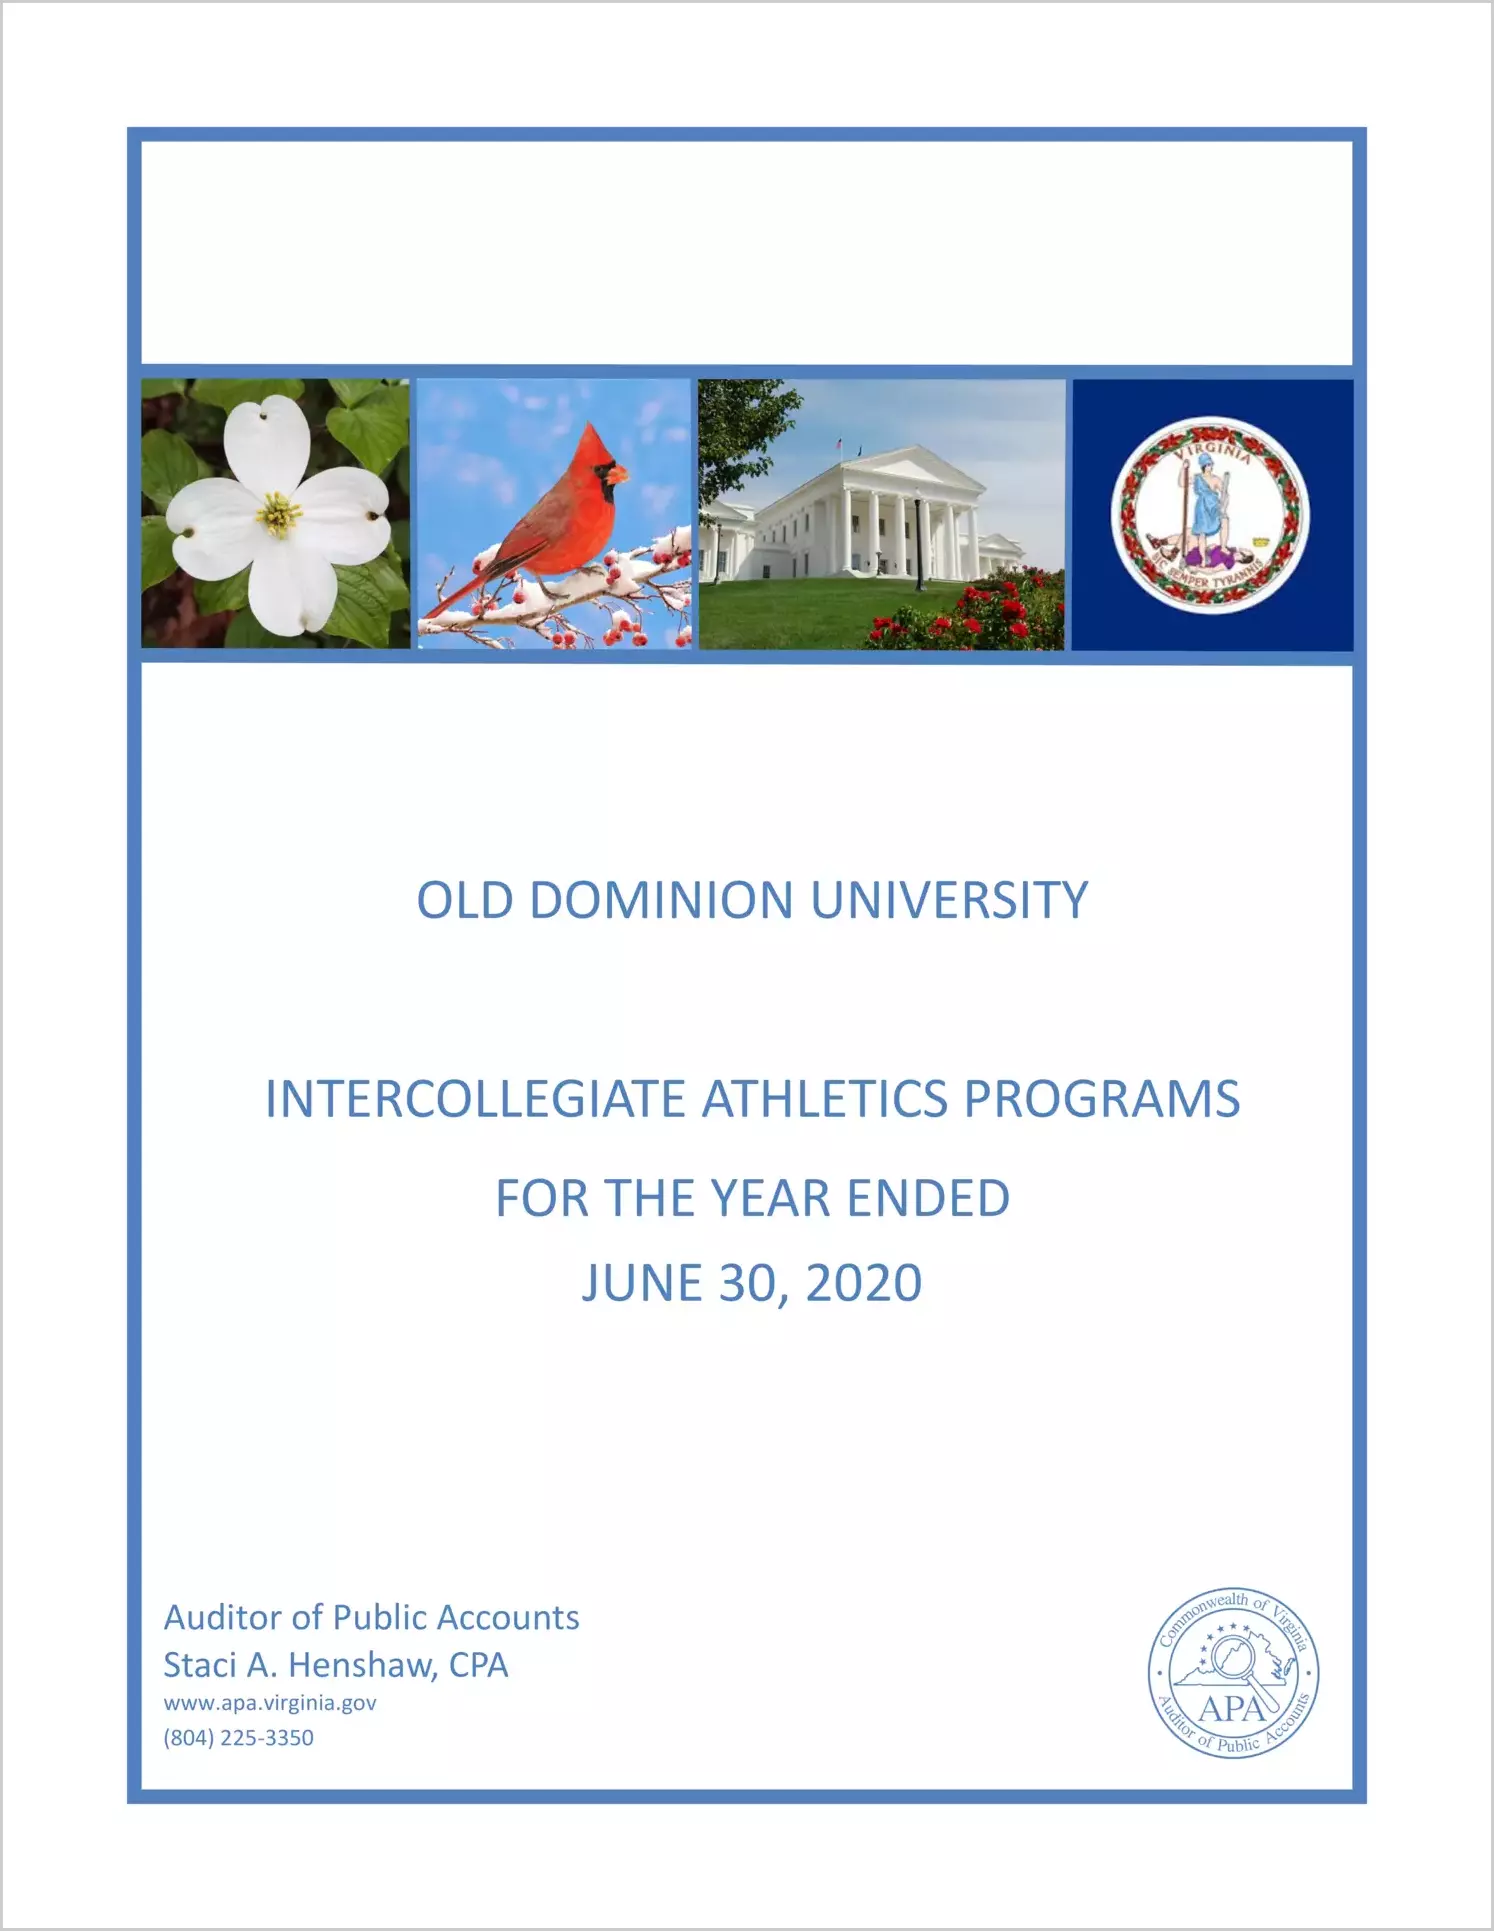 Old Dominion University Intercollegiate Athletics Programs for the year ended June 30, 2020